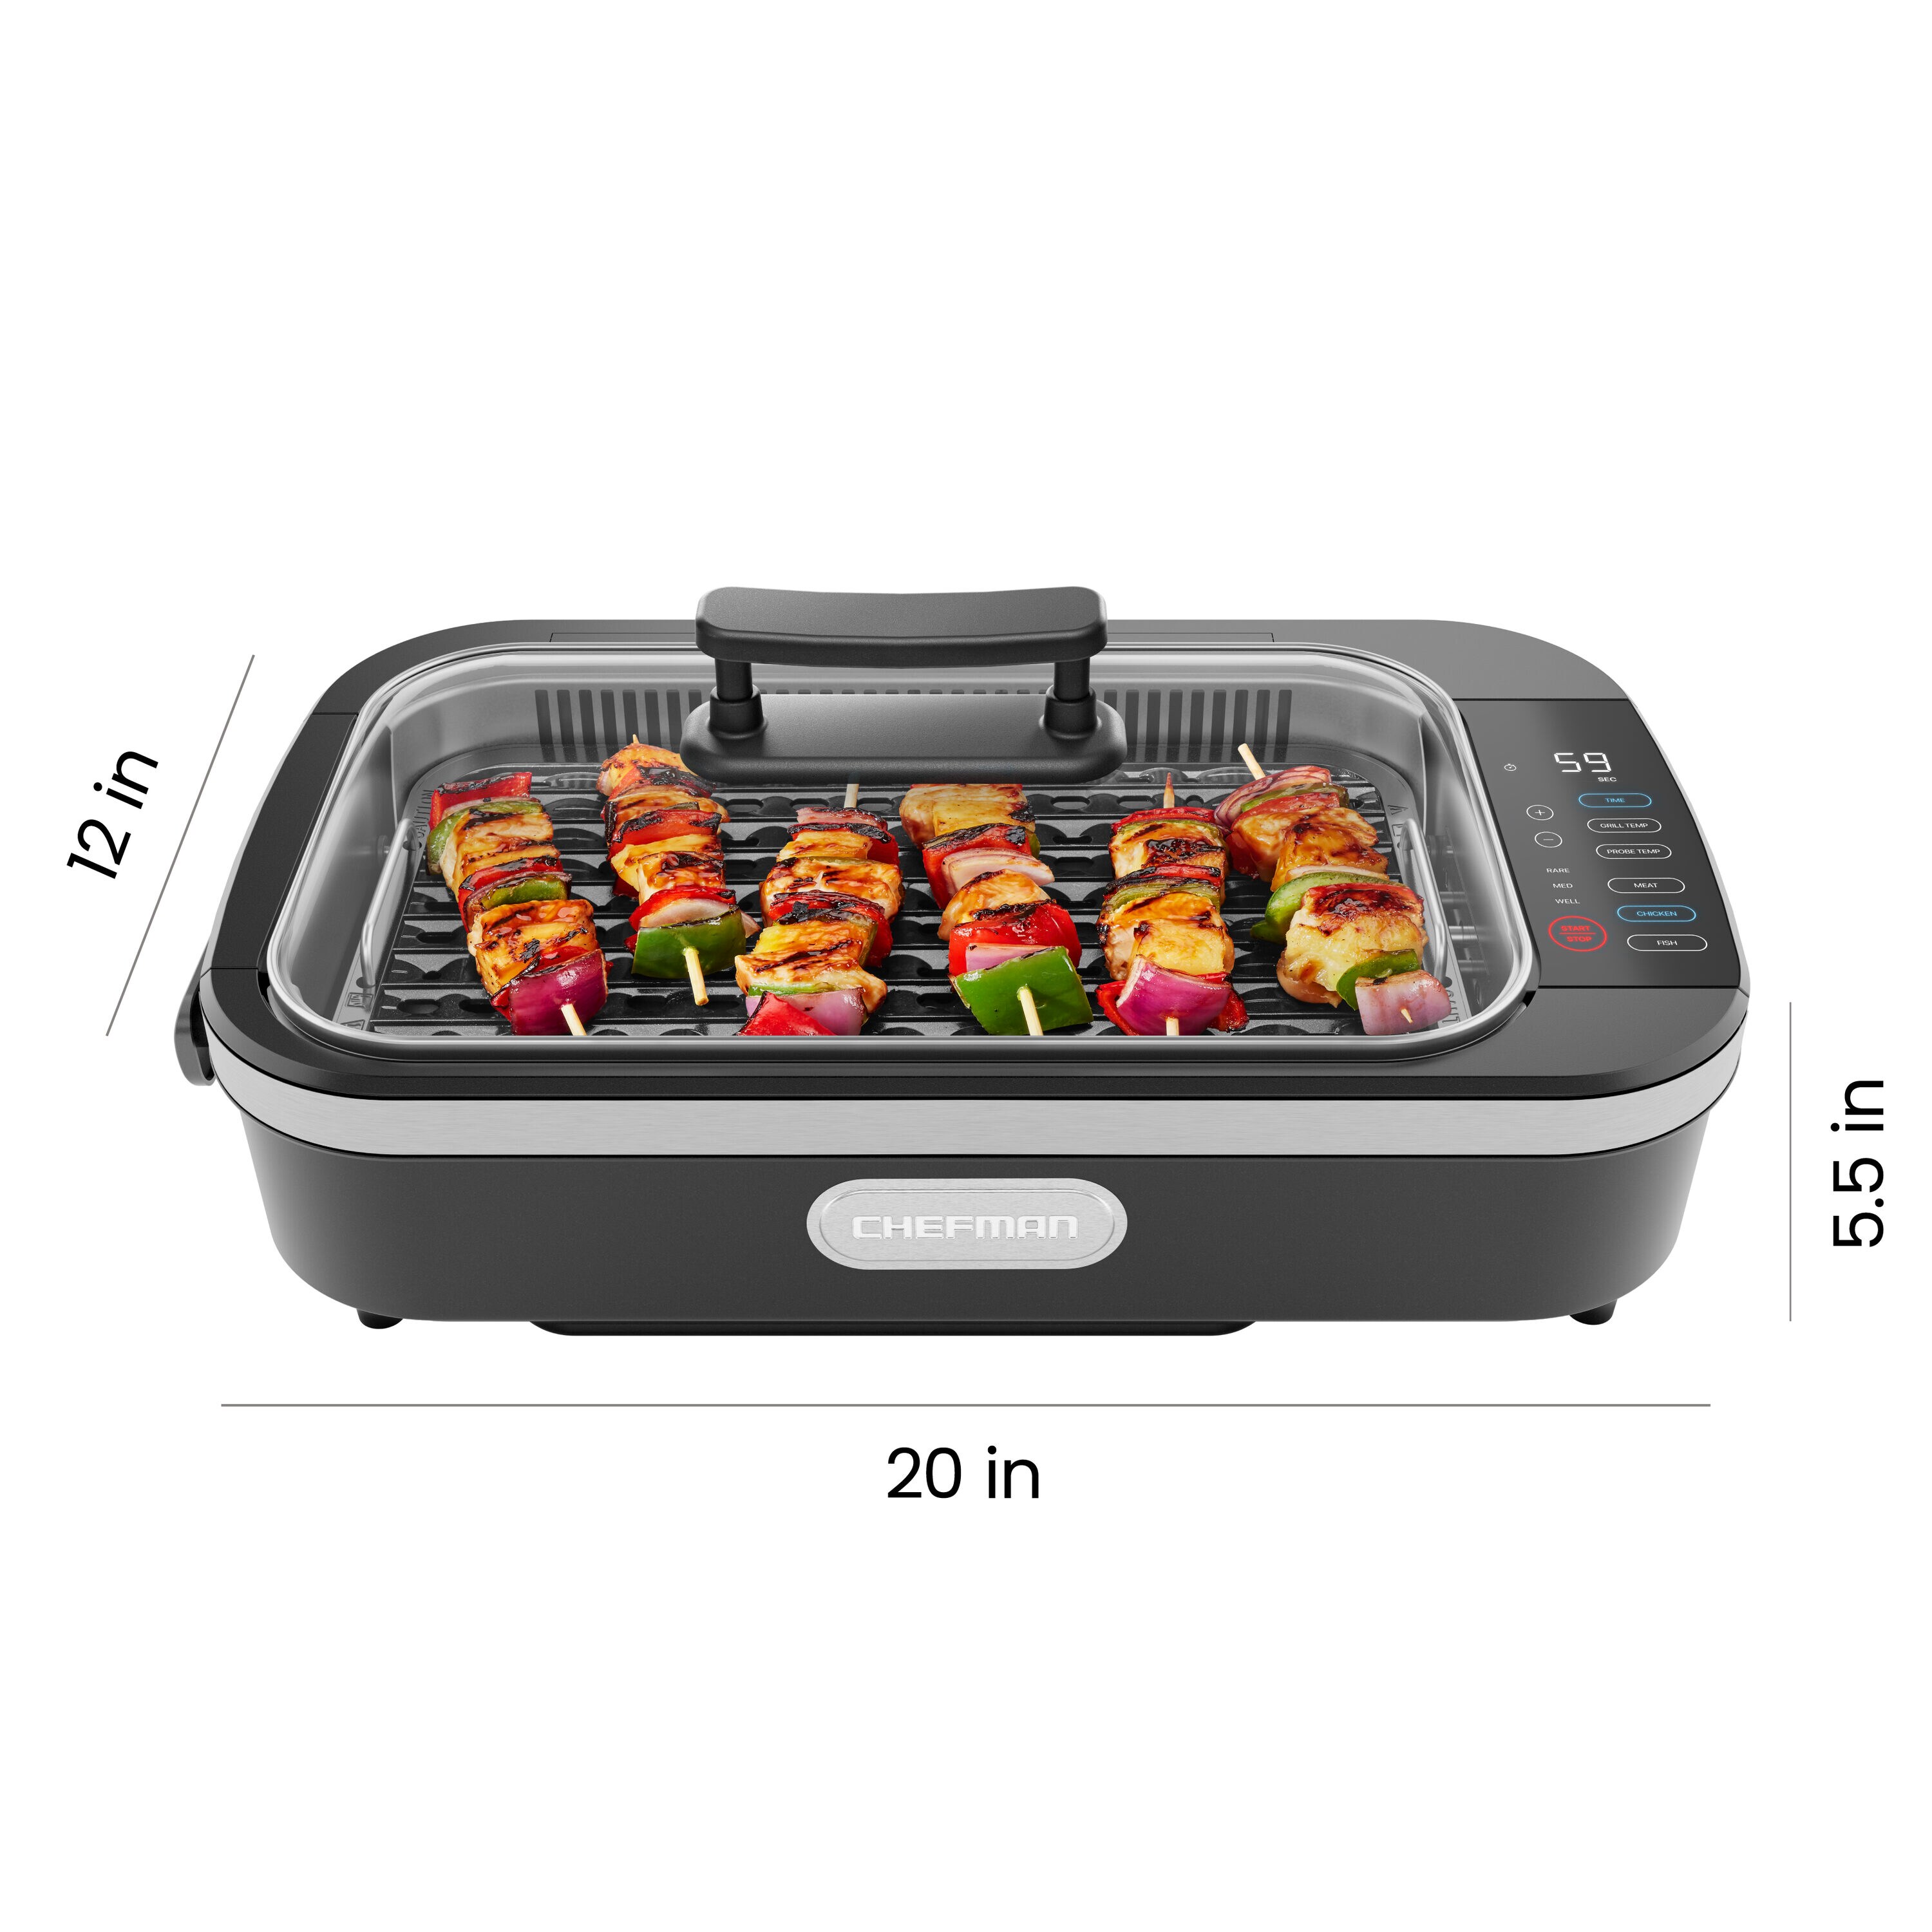 Hamilton Beach Electric Indoor Grill, 6-Serving, Large 90 sq.in. Nonstick  Easy Clean Plates, Floating Hinge for Thicker Foods, 1200W, Stainless  Steel, 25371 